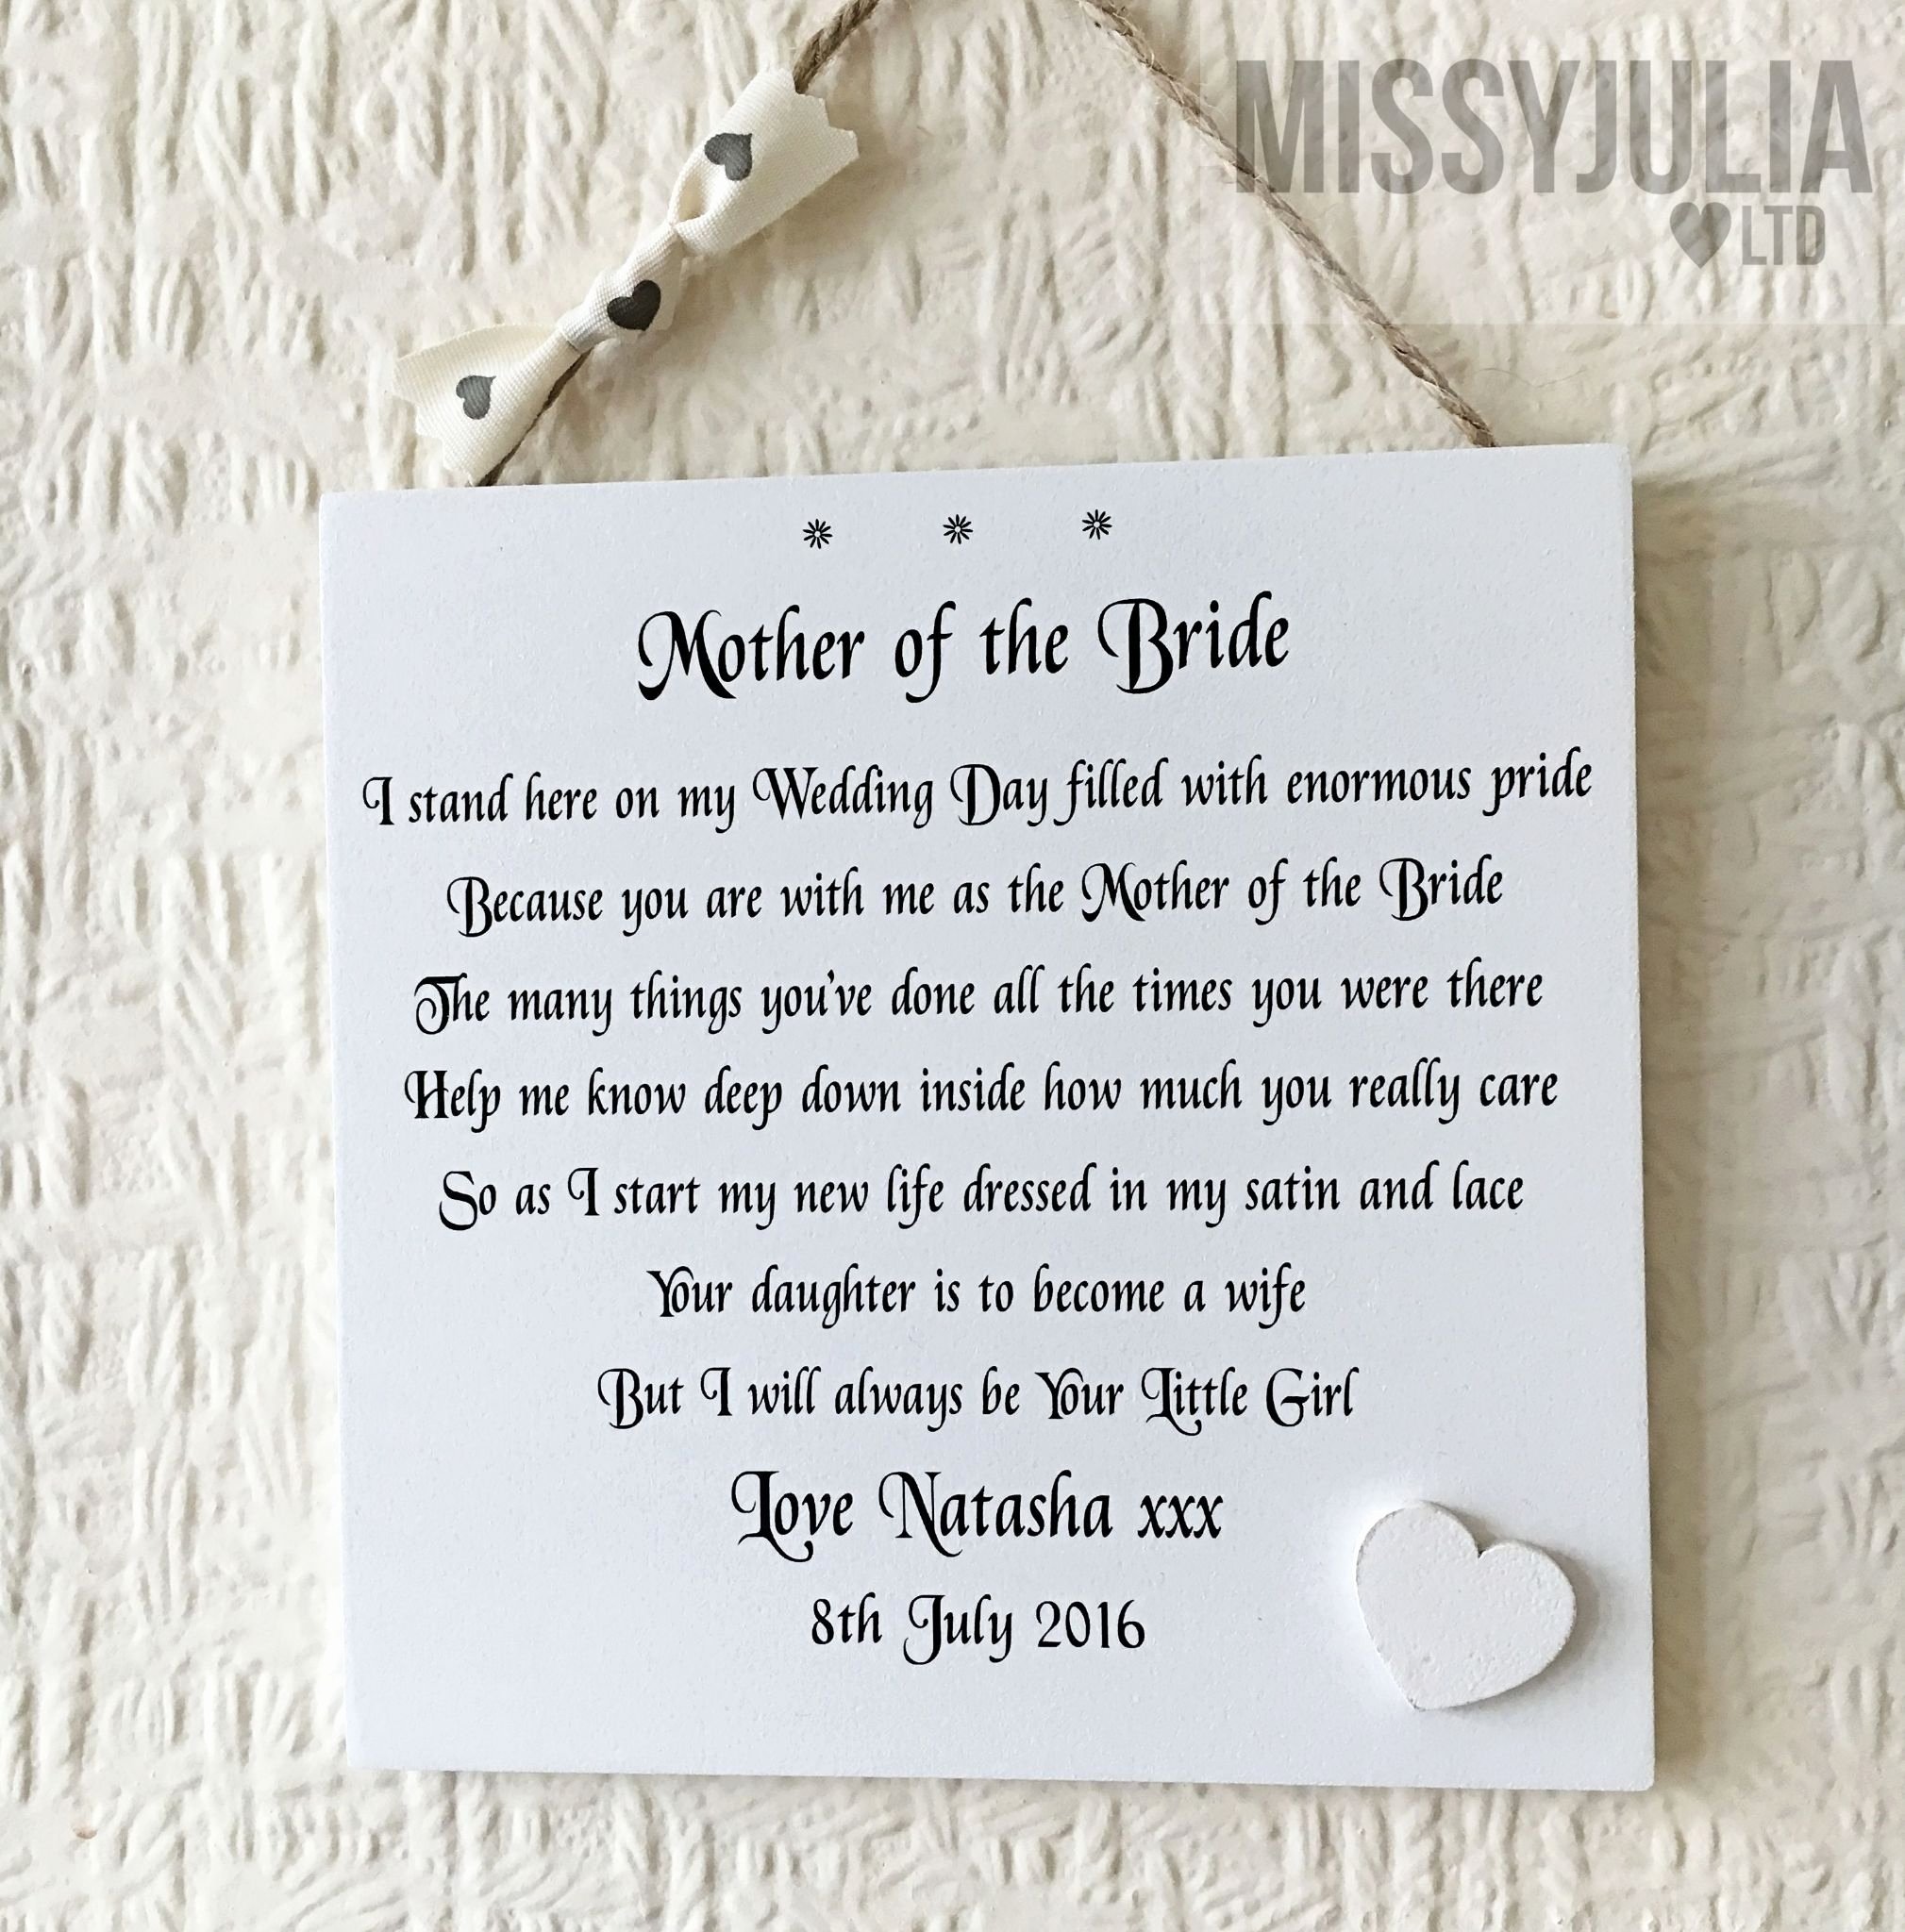 10 Nice Gift Ideas For Mother Of The Bride mother wedding gift ideas new law topweddingservice the bride groom 2022